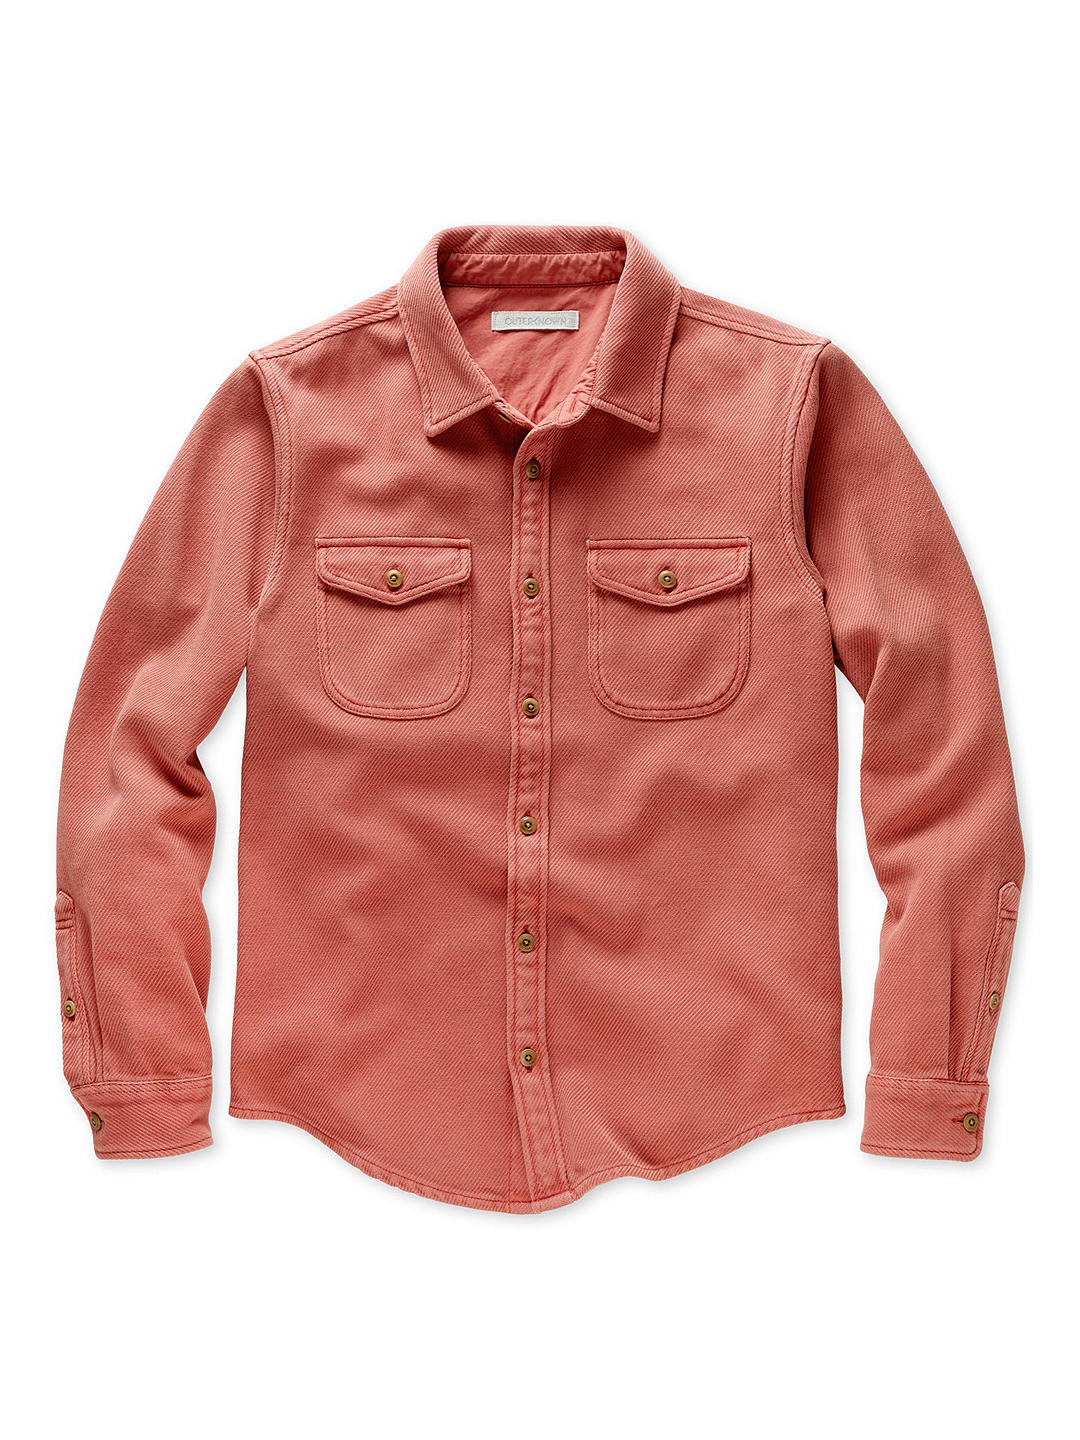 Outerknown Chroma Blanket Shirt, Mineral Red